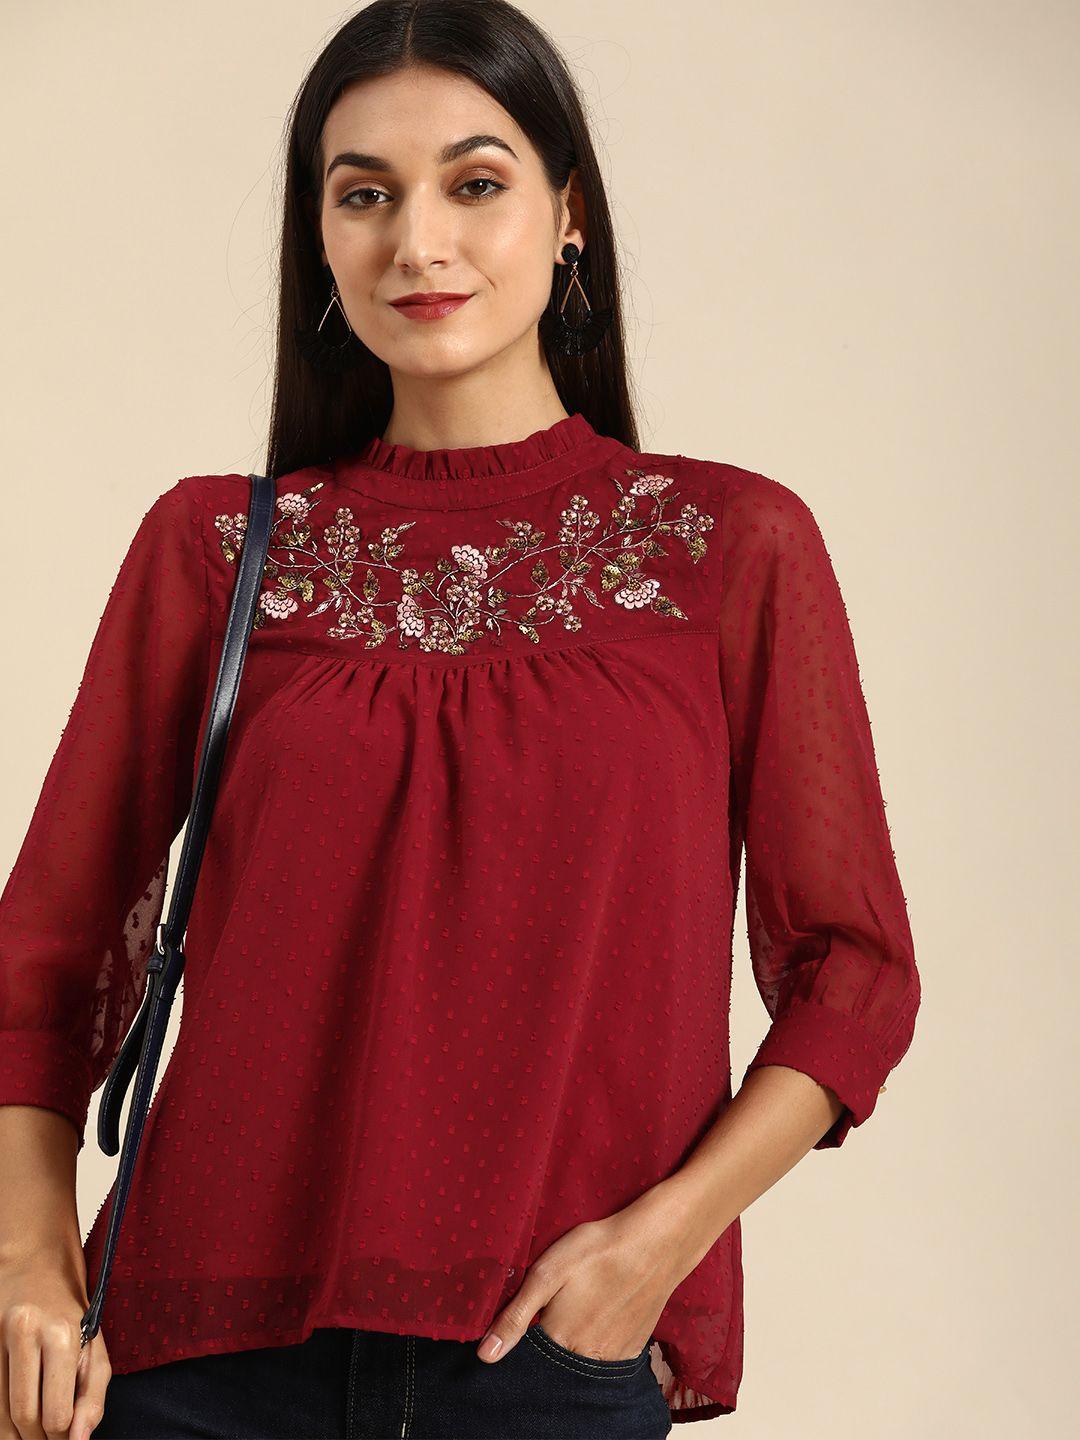 all about you red & gold-toned floral embroidered embellished  top